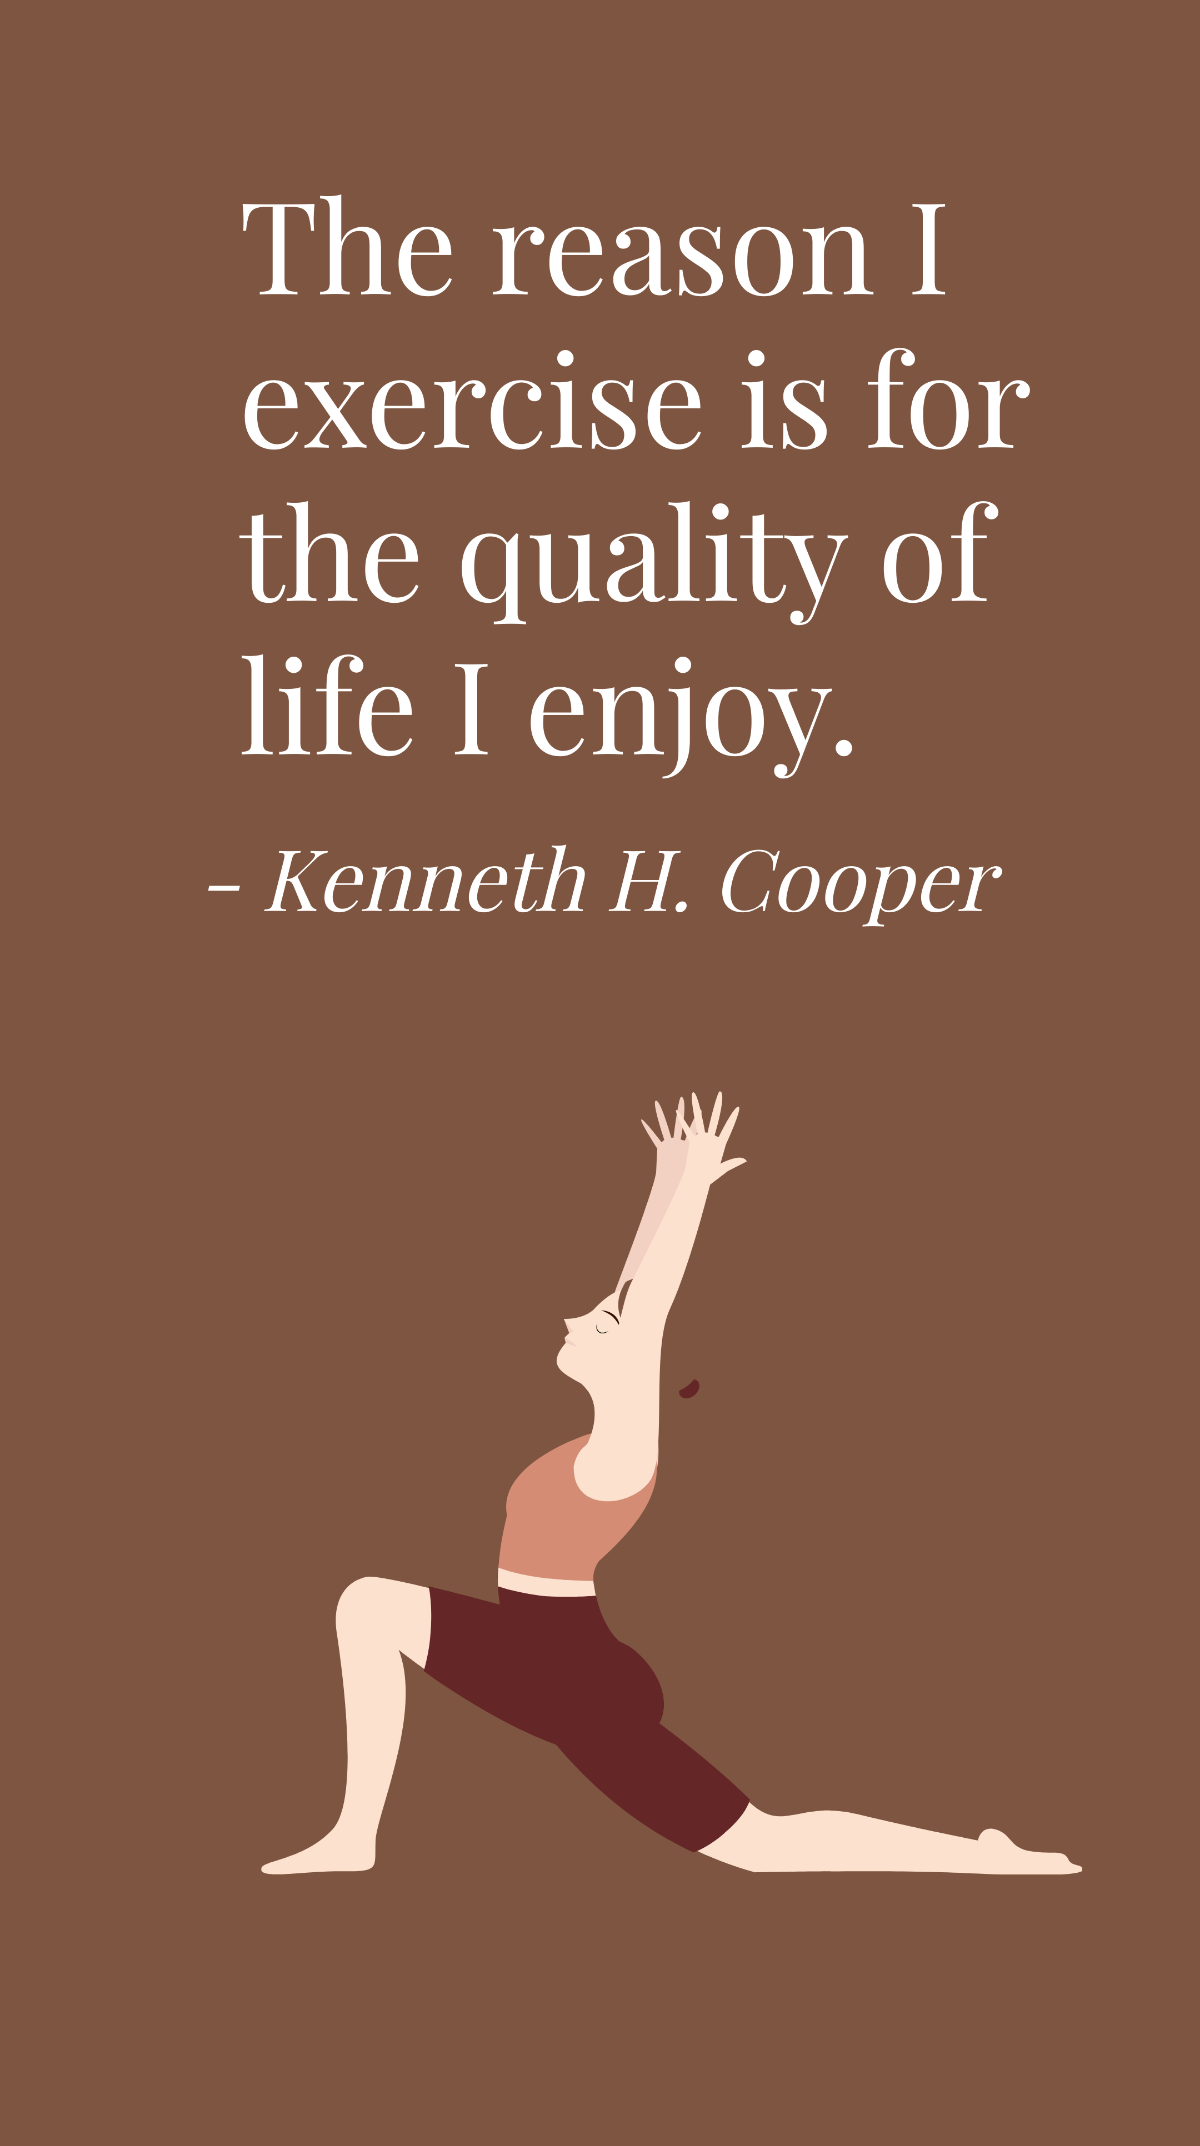 Kenneth H. Cooper - The reason I exercise is for the quality of life I enjoy. Template